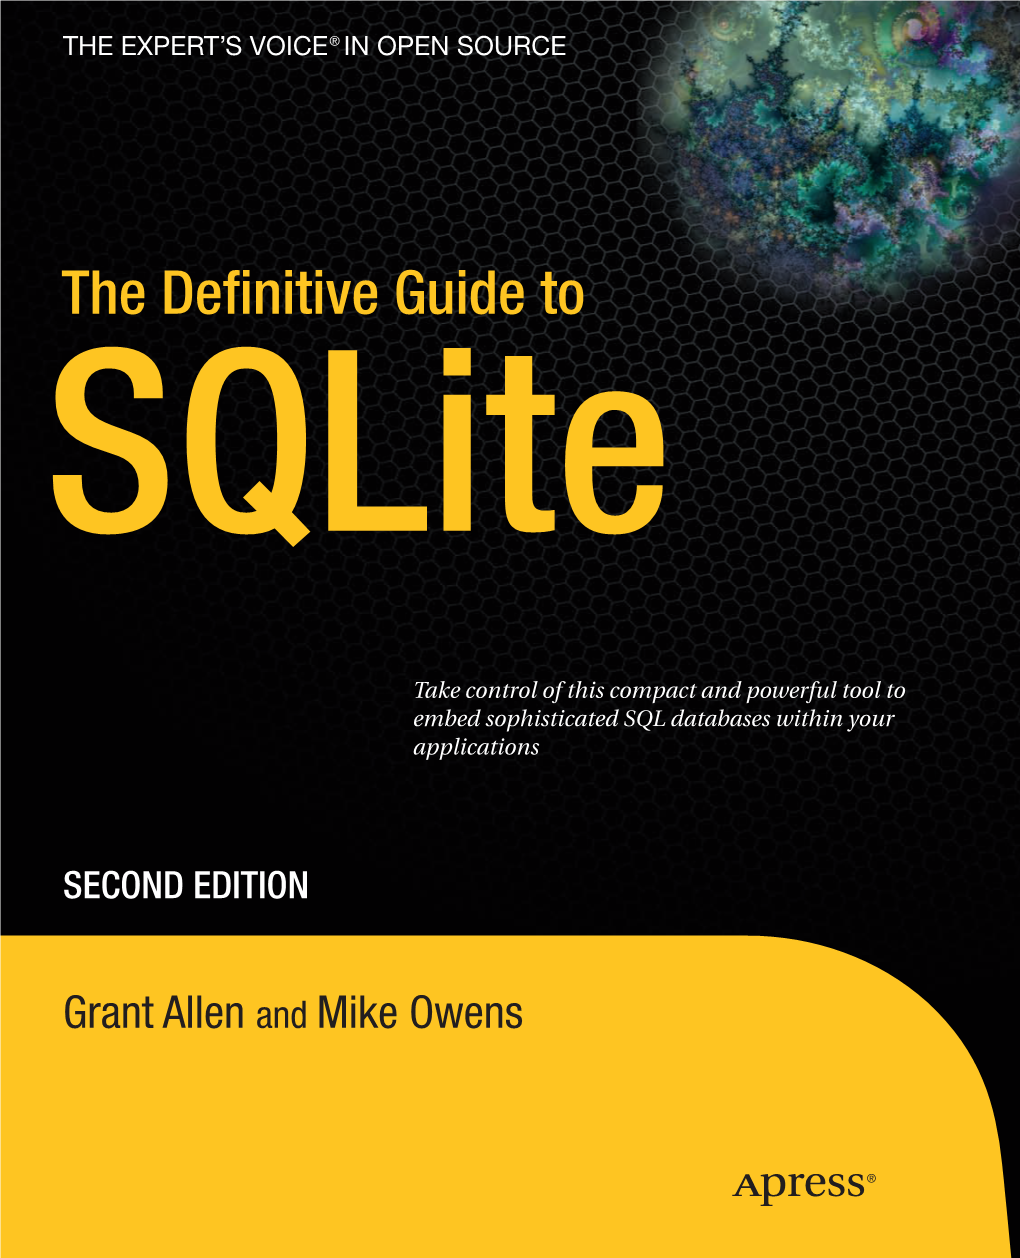 The Definitive Guide to Sqlite, Second Edition (Expert's Voice In